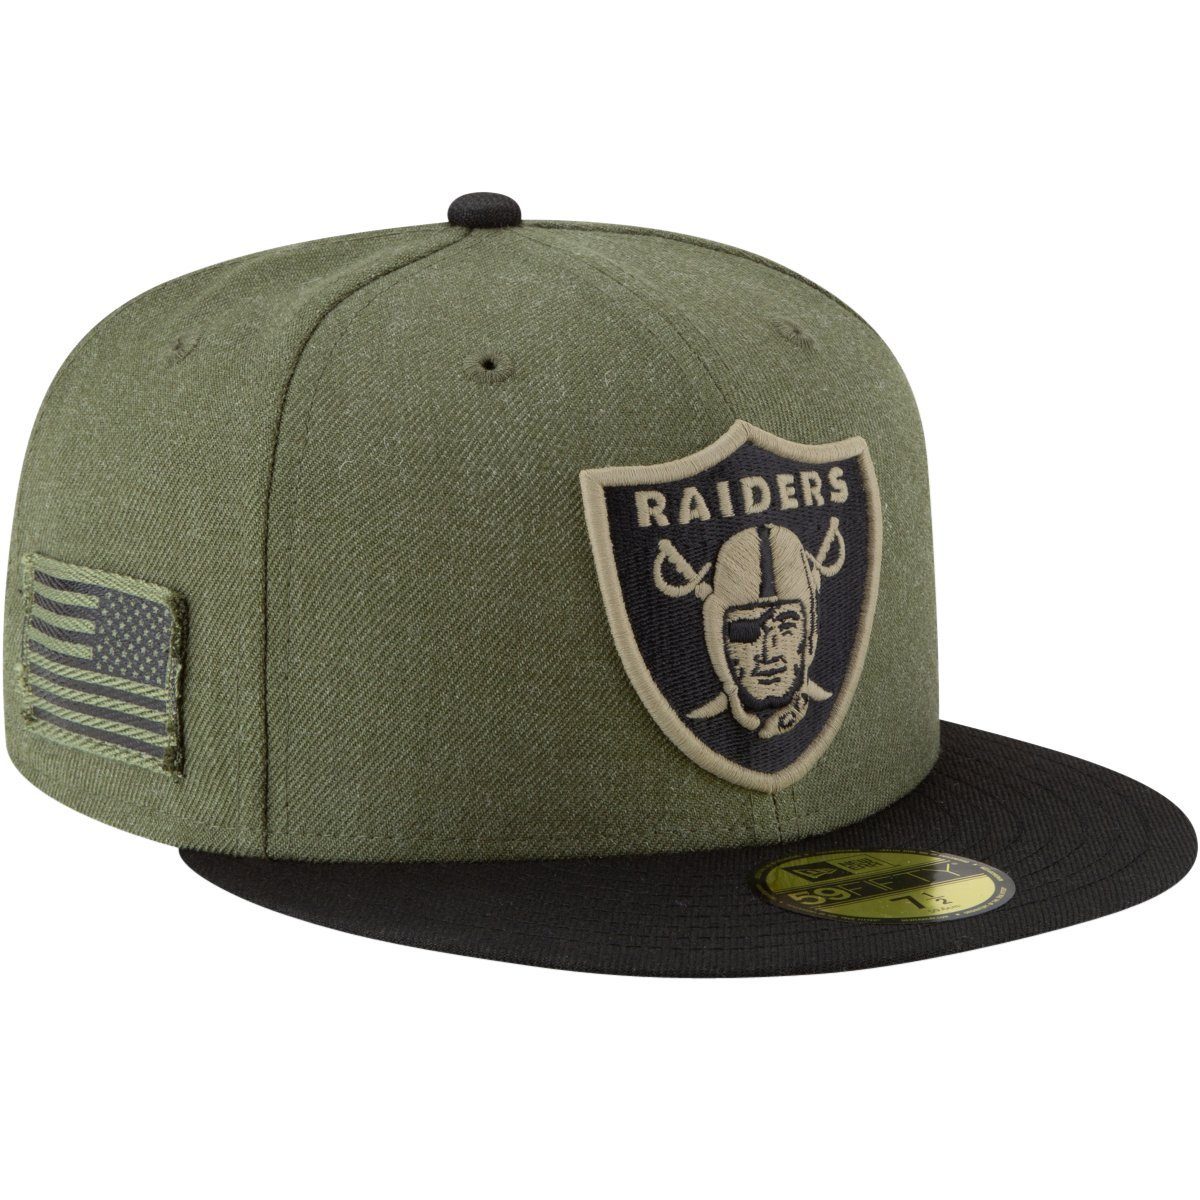 New Era Fitted Cap 59Fifty NFL Salute to Service